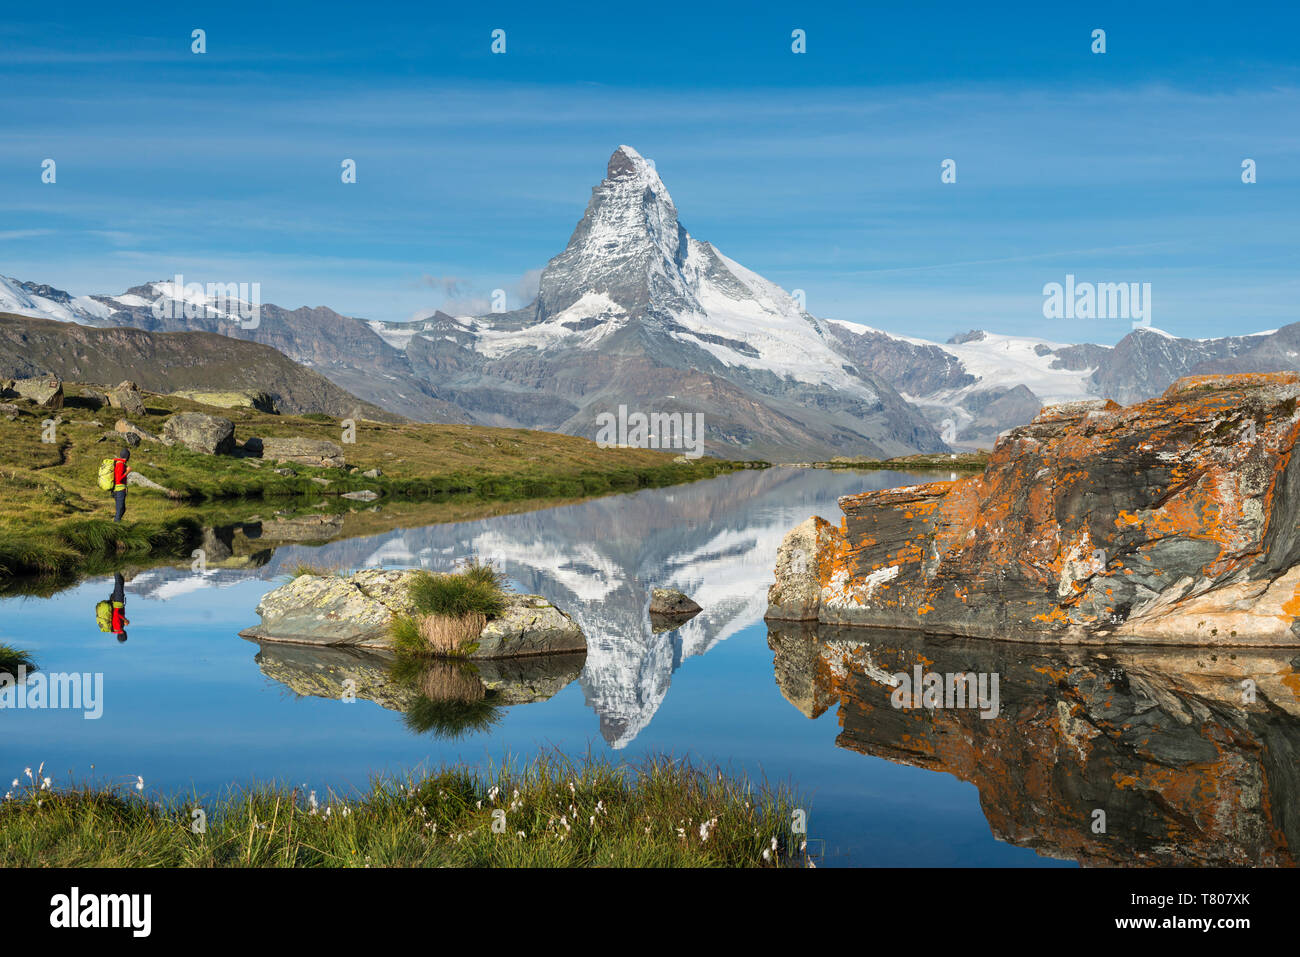 A walker hiking in the Alps takes in the view of the Matterhorn reflected in Stellisee lake at dawn, Swiss Alps, Switzerland, Europe Stock Photo